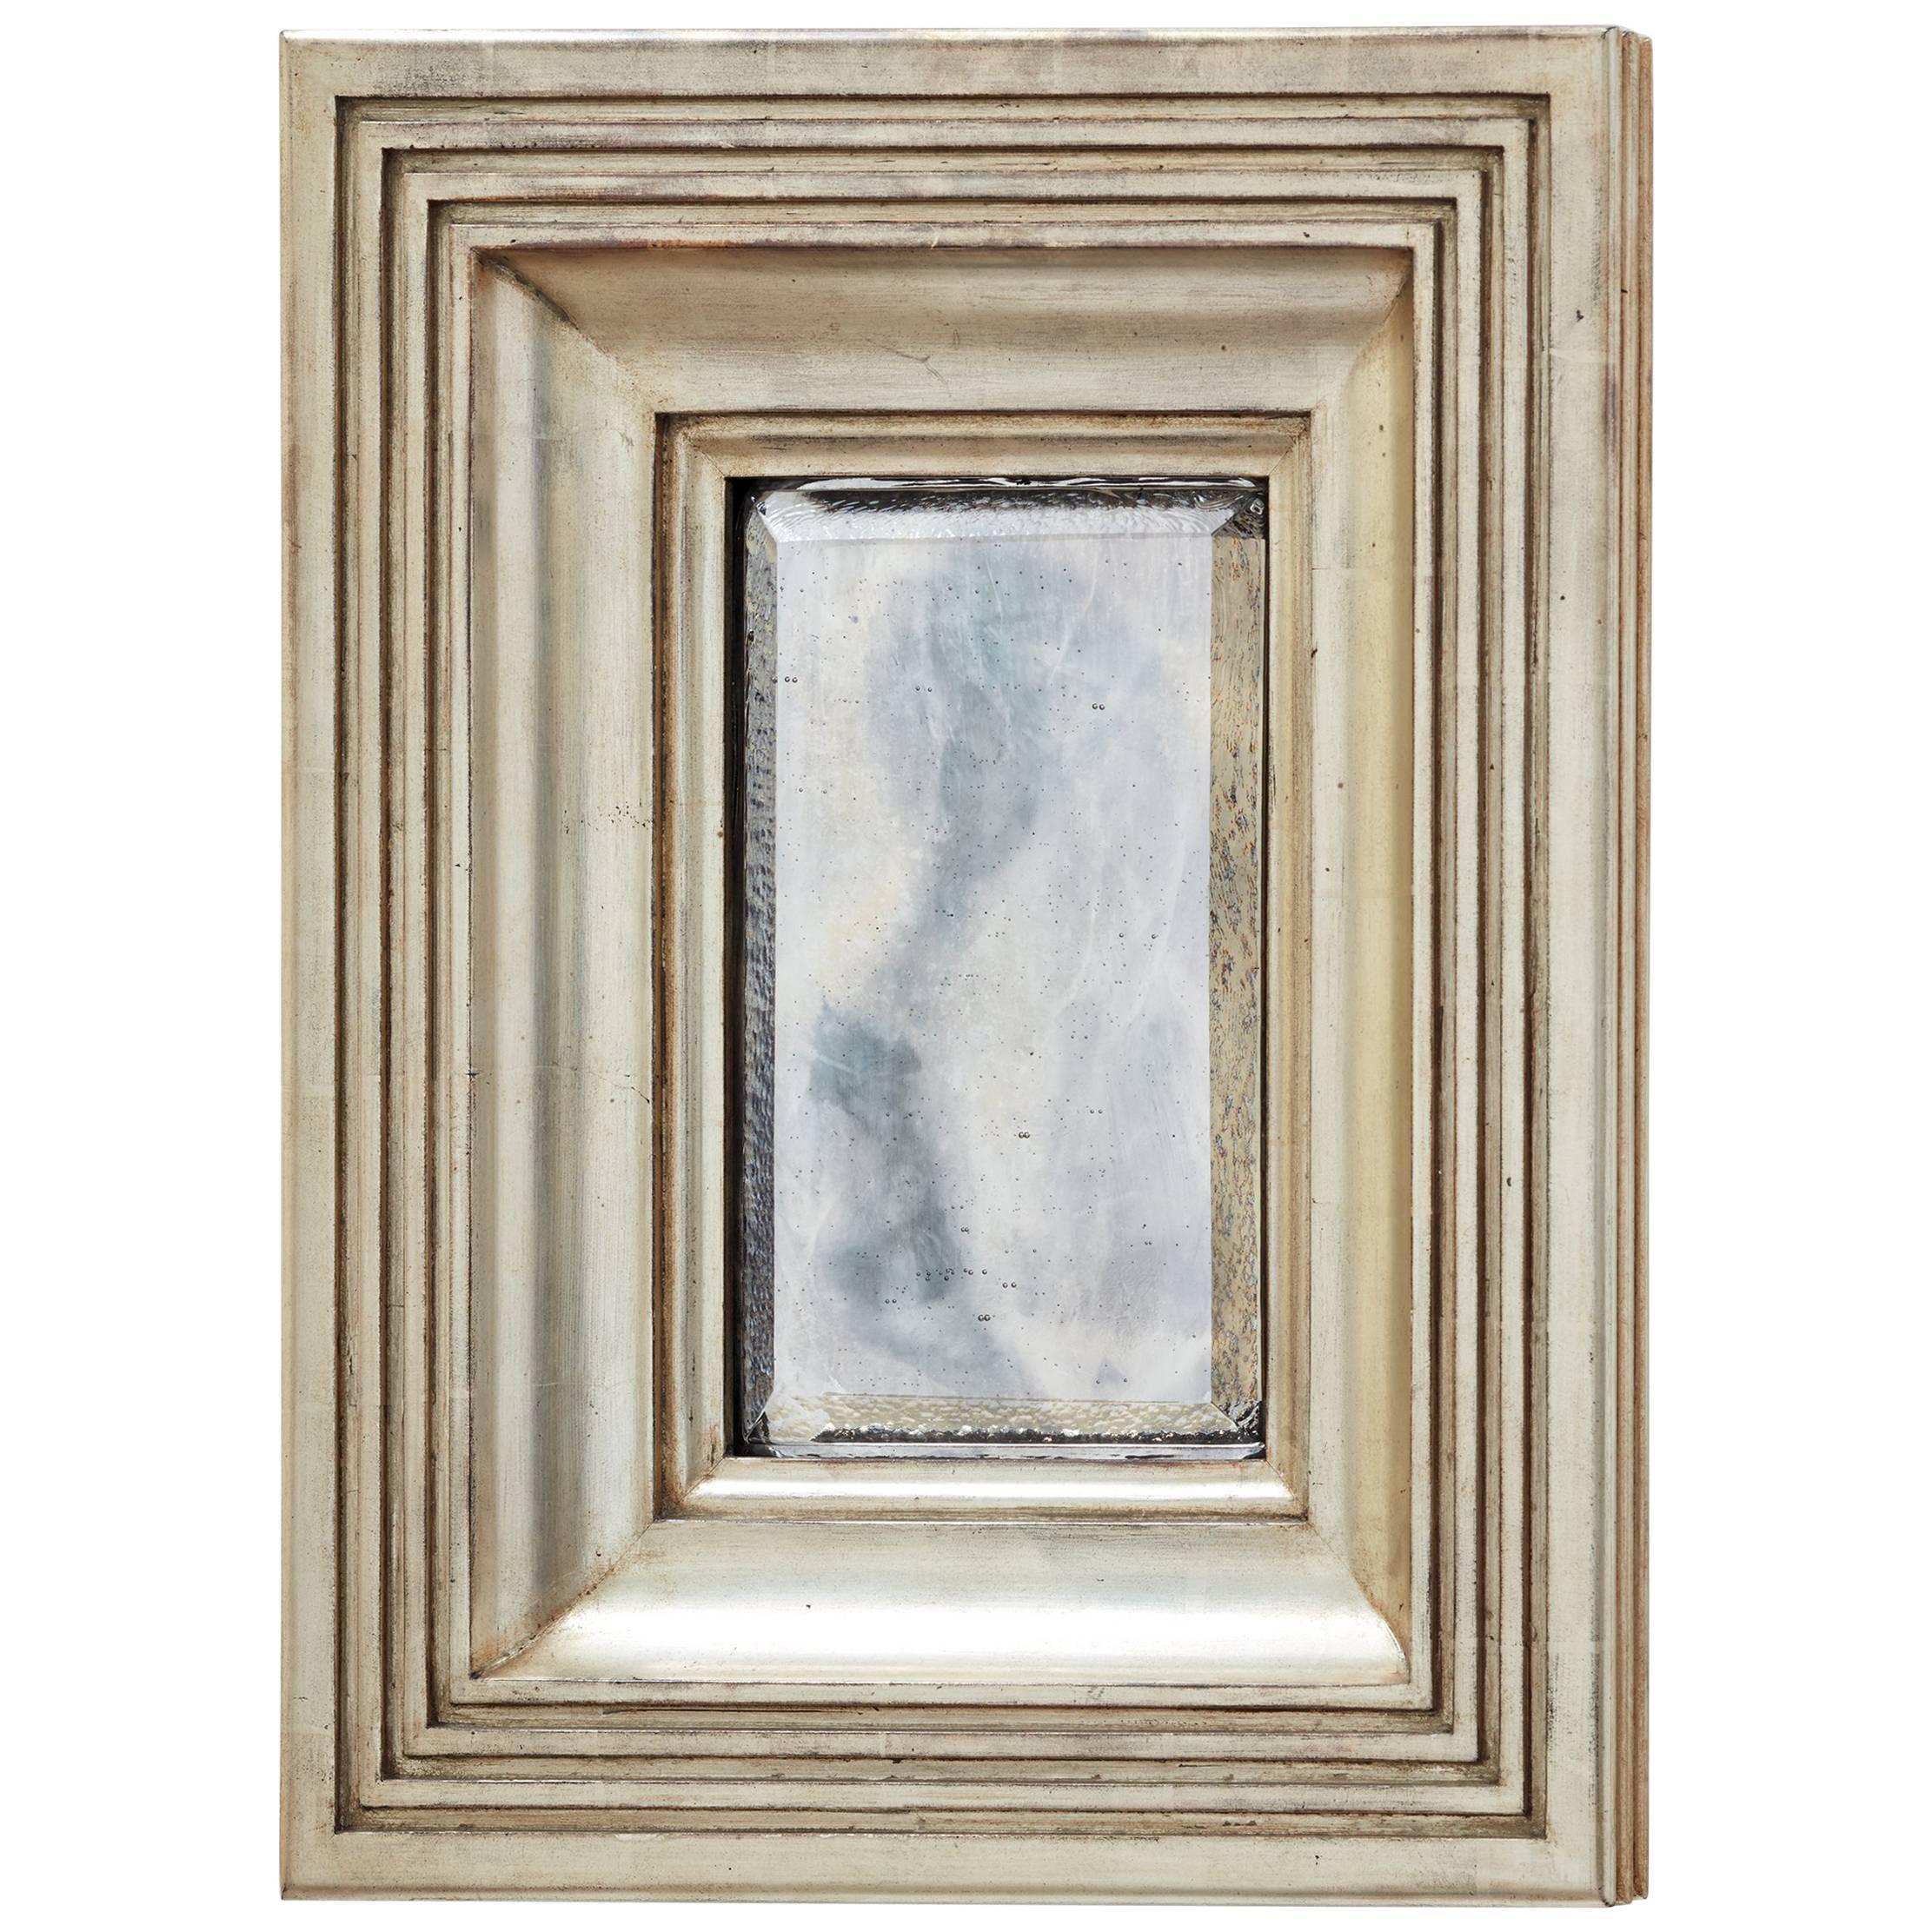 Degas No. 4 Fluted/Reeded Wall Mirror, Gilded in White Gold by Bark Frameworks For Sale